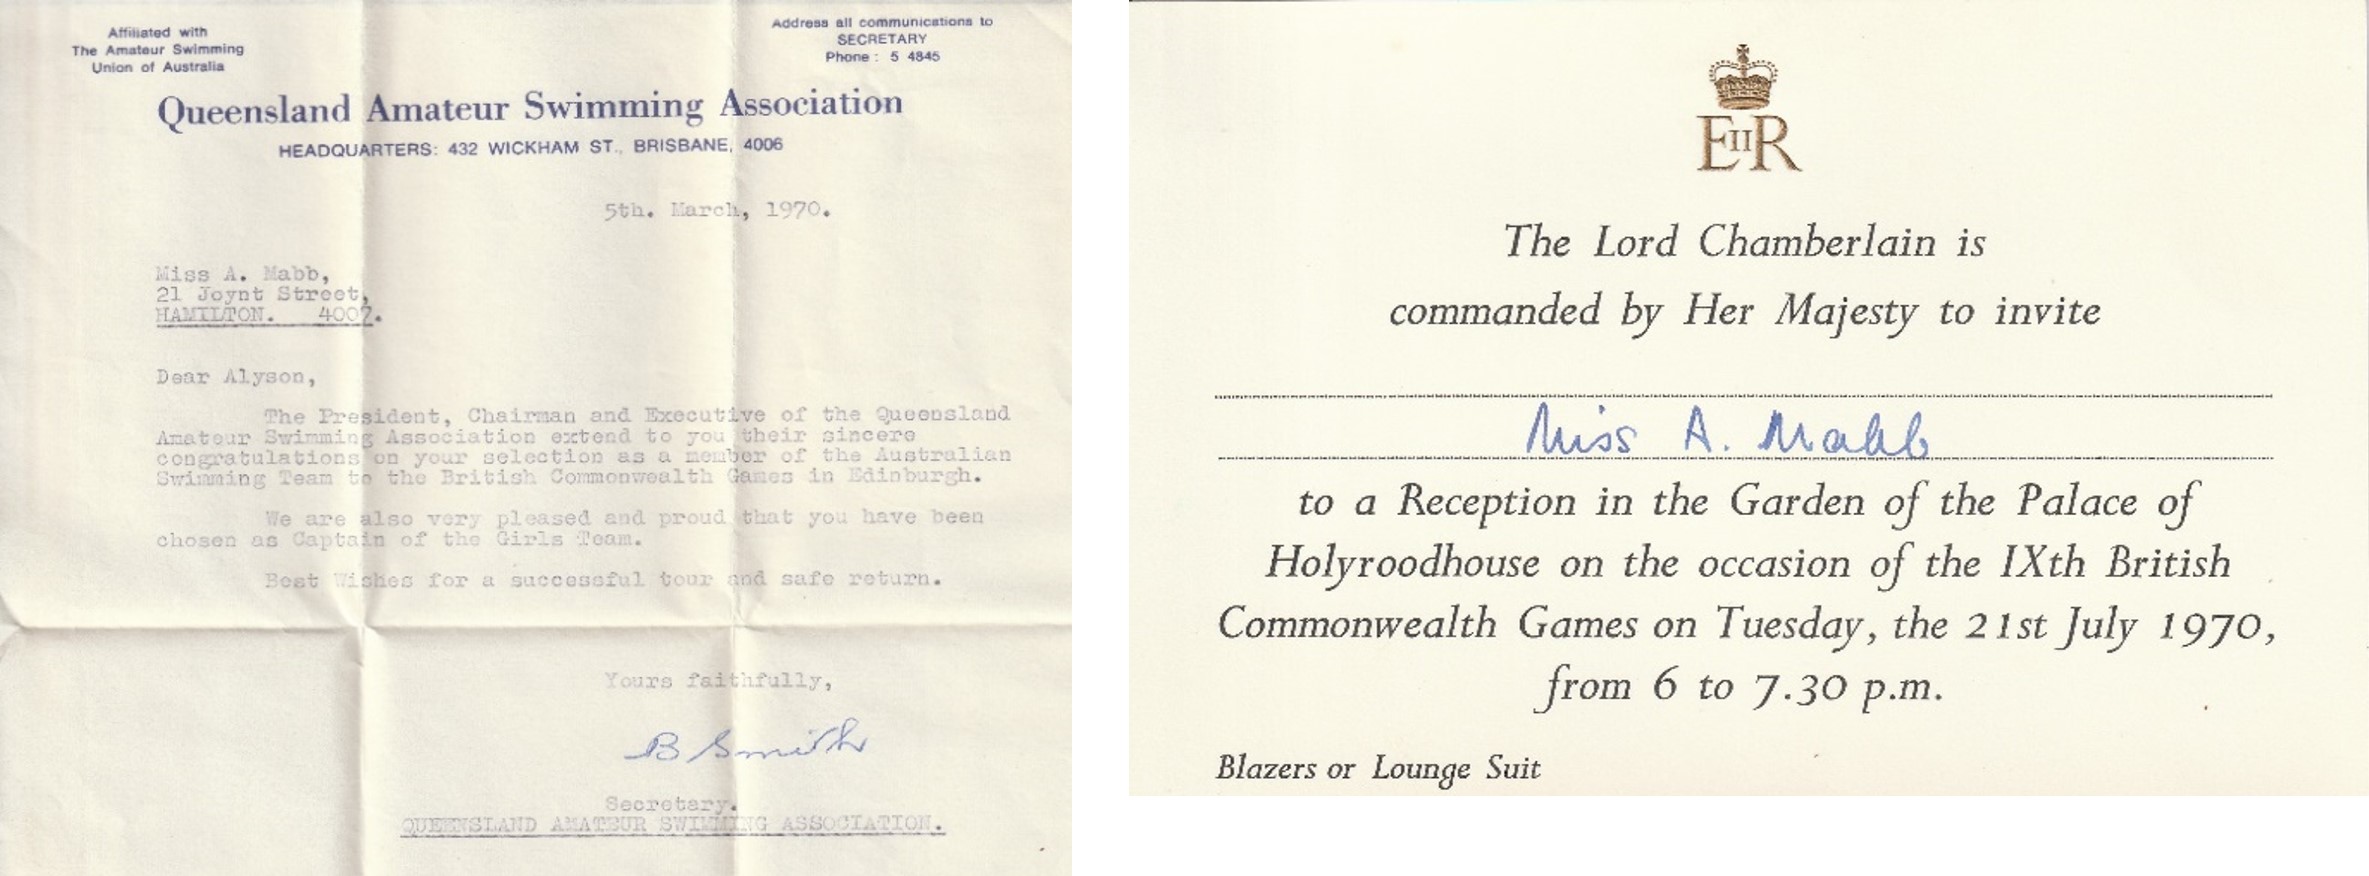 Qld Amateur Swimming Association letter to Allyson re Captain of the Girls Team March 1970 and Invitation from Her Majesty the Queen to Reception for IXth British Commonwealth Games 21 July 1970 